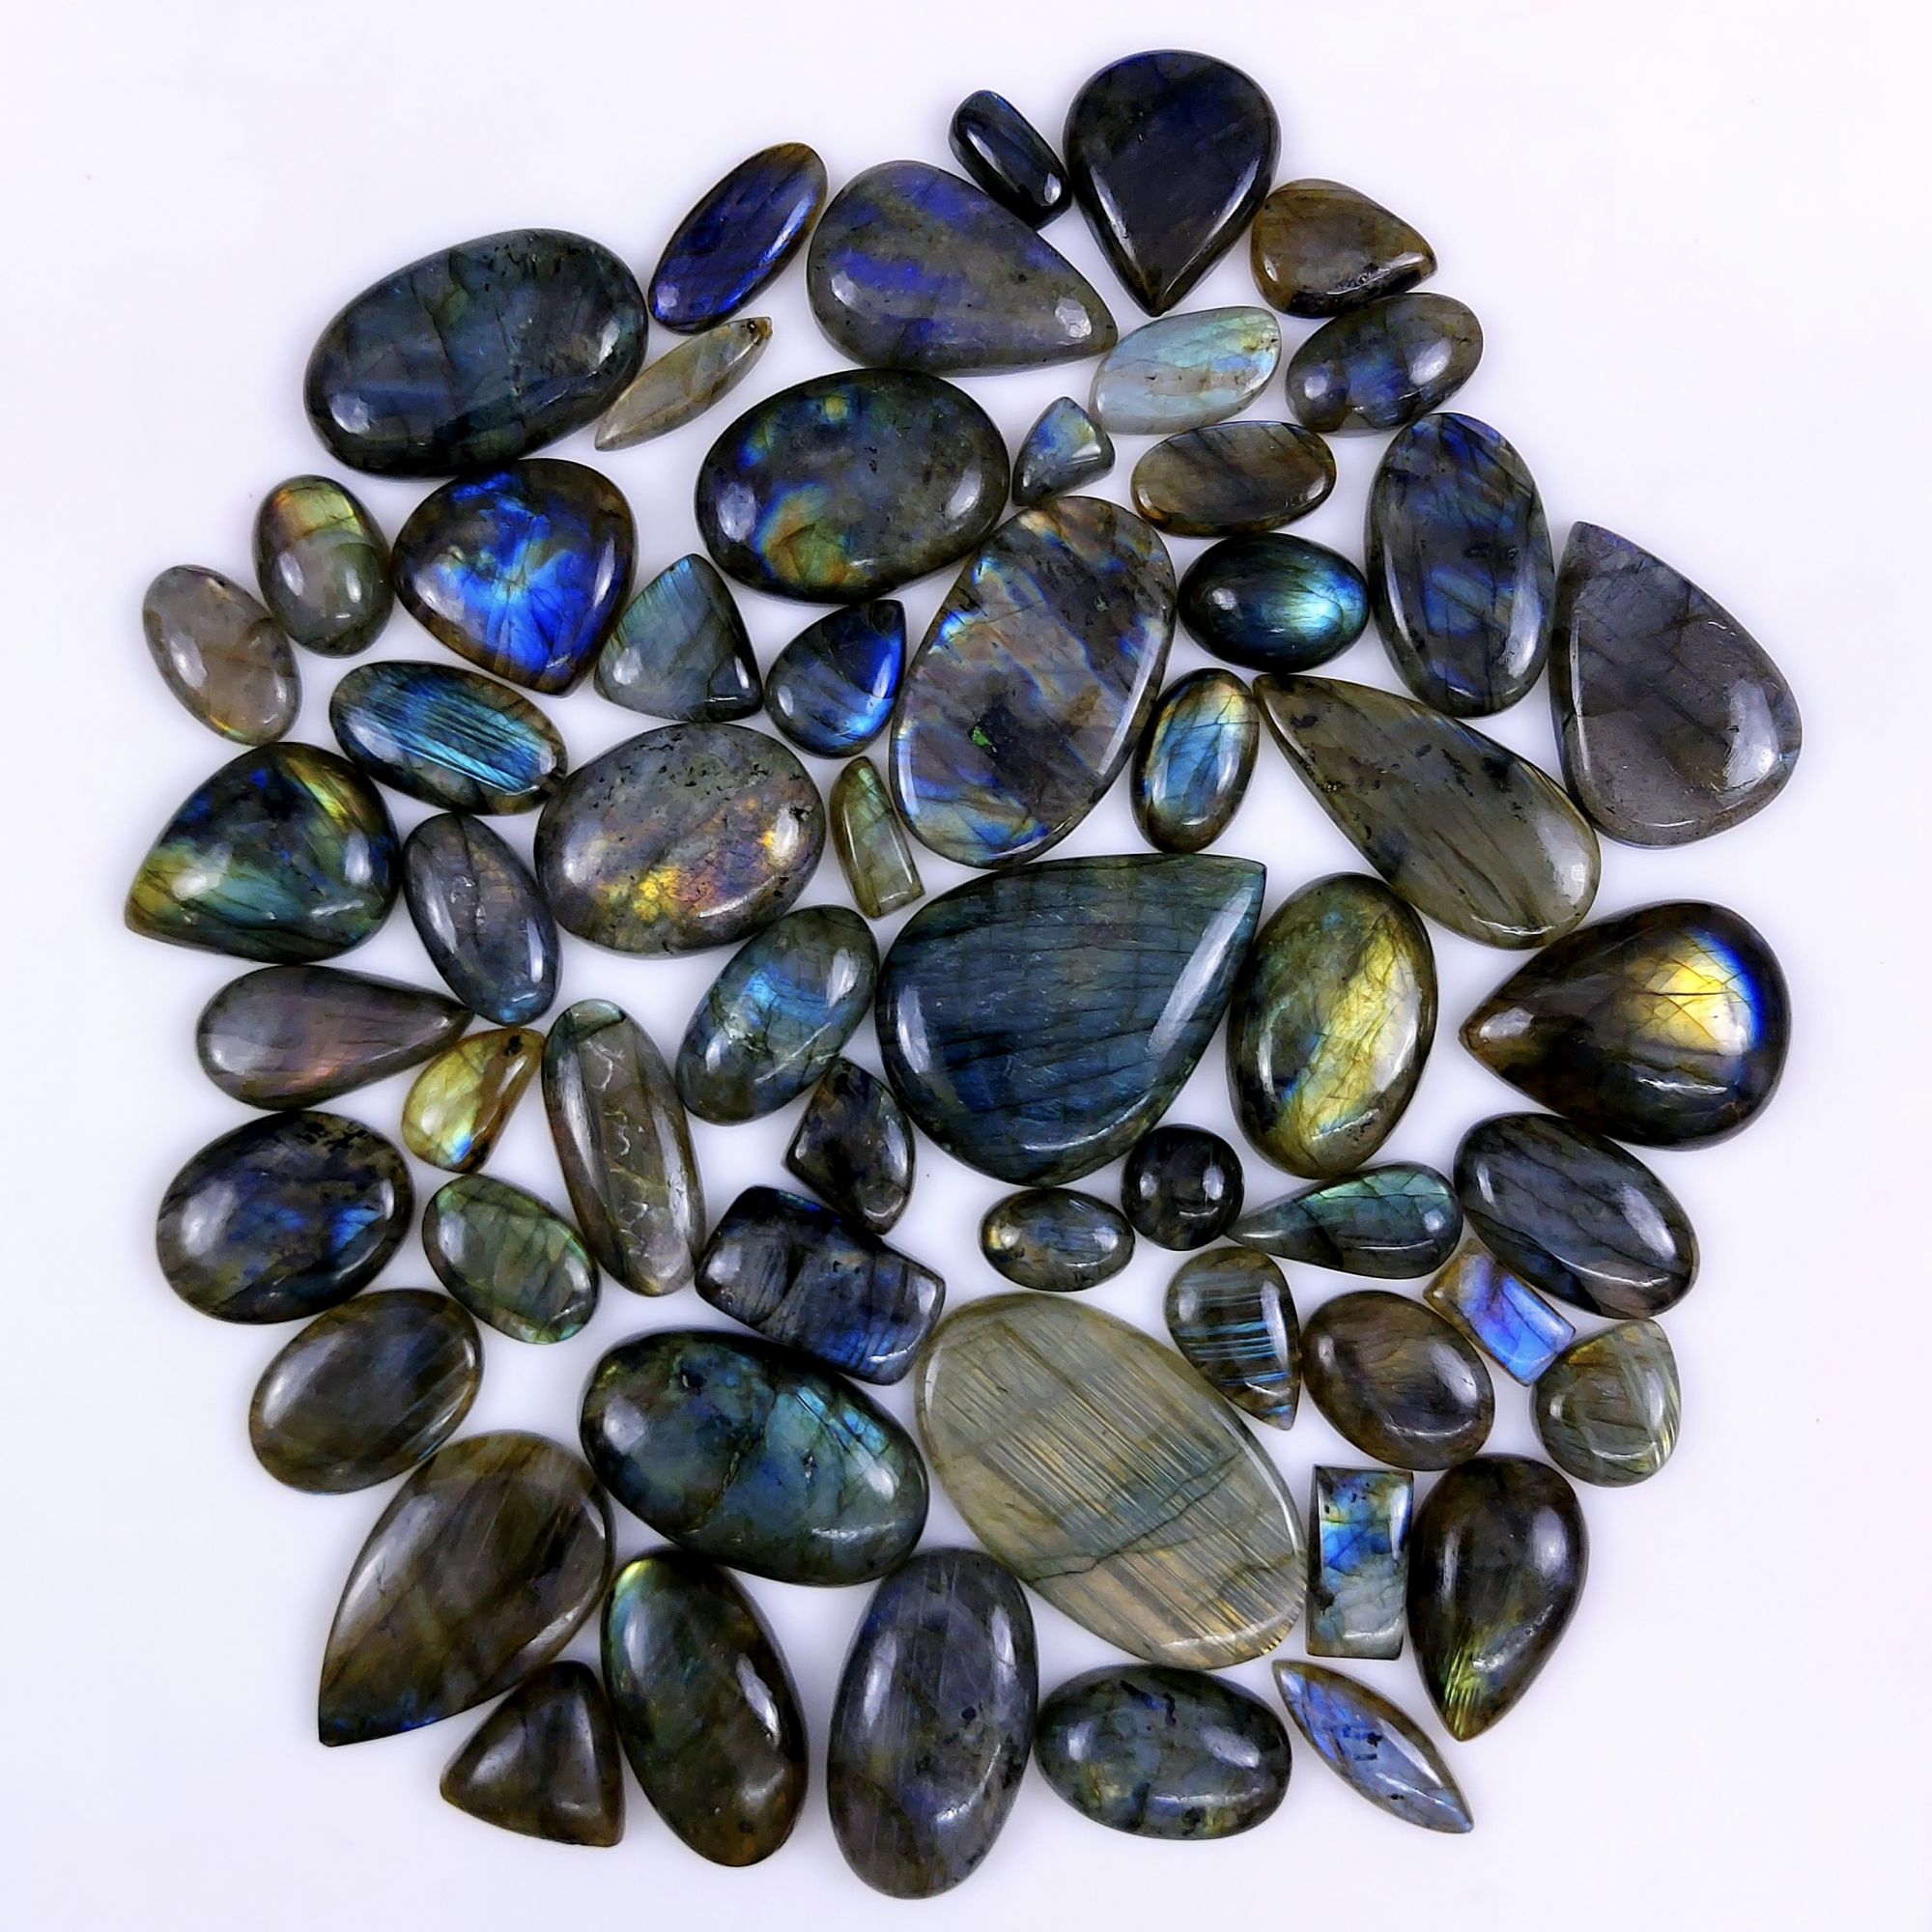 58pc 1786Cts Labradorite Cabochon Multifire Healing Crystal For Jewelry Supplies, Labradorite Necklace Handmade Wire Wrapped Gemstone Pendant 50x35 14x10mm#6257